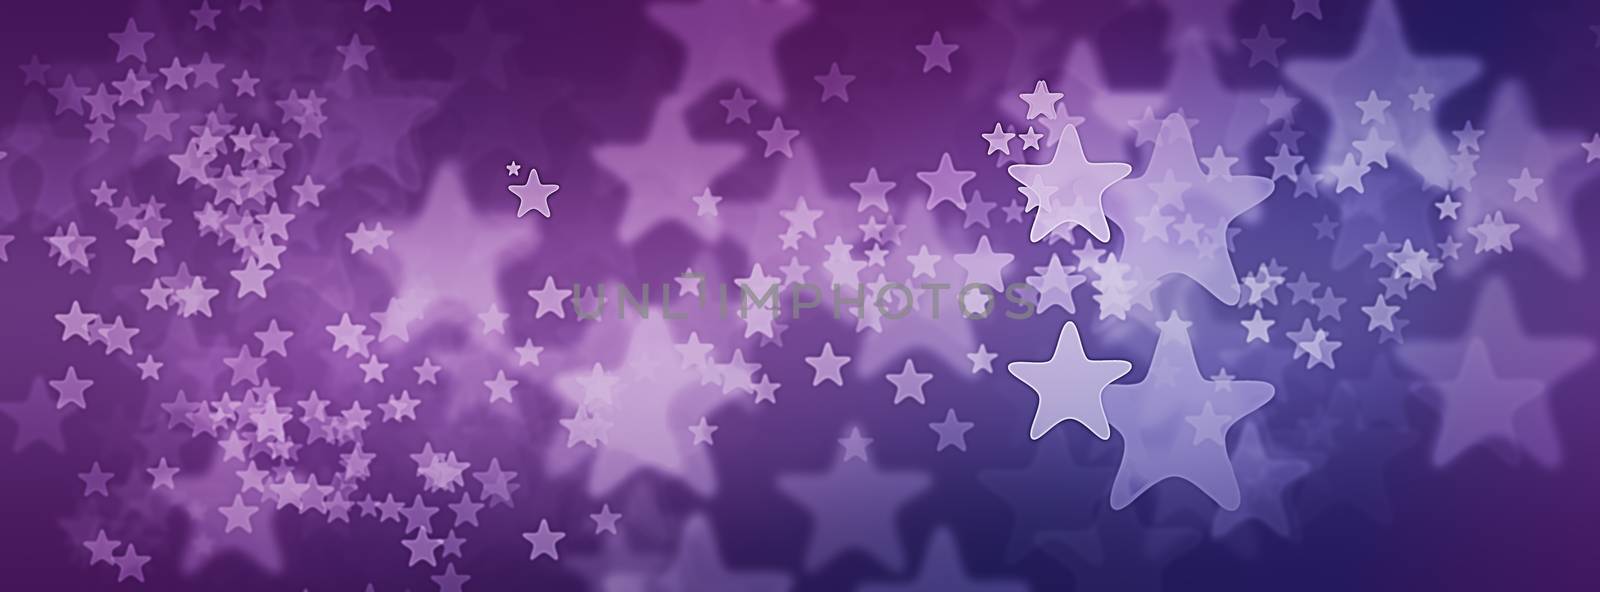 Purple Starry Background for Facebook Cover Photo by sherj